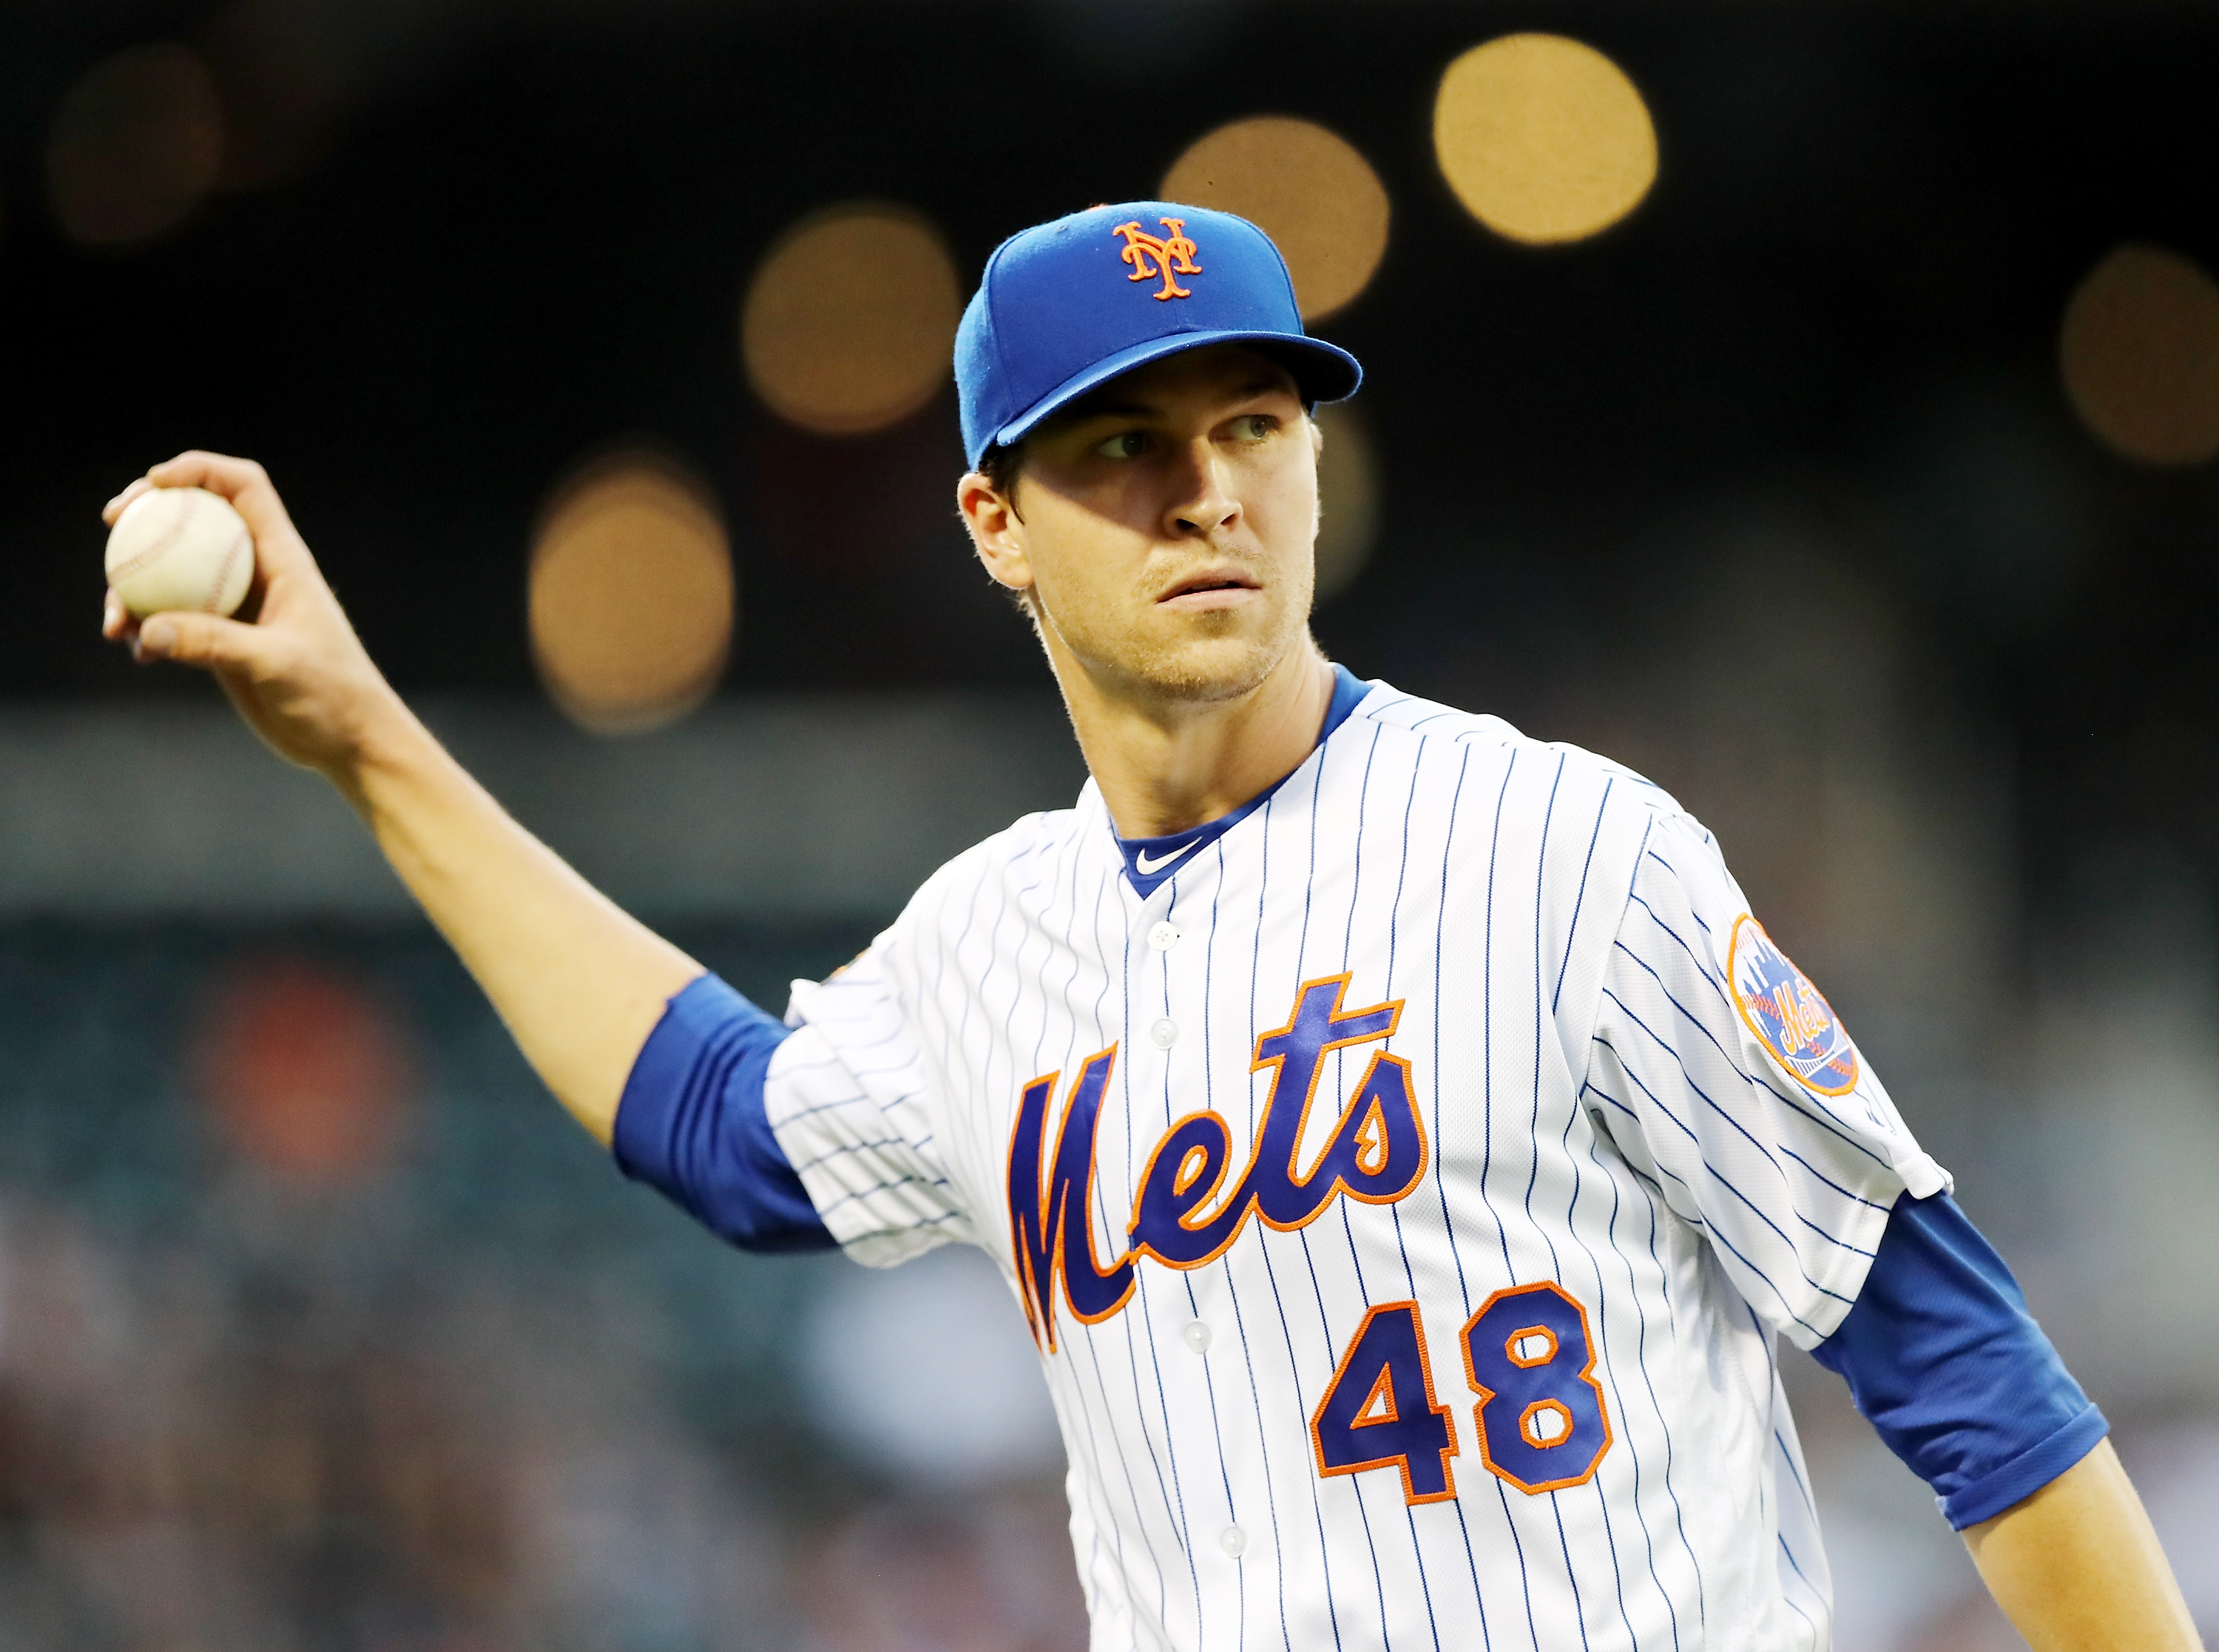 Jacob deGrom breaks 108-year-old MLB record in Mets win